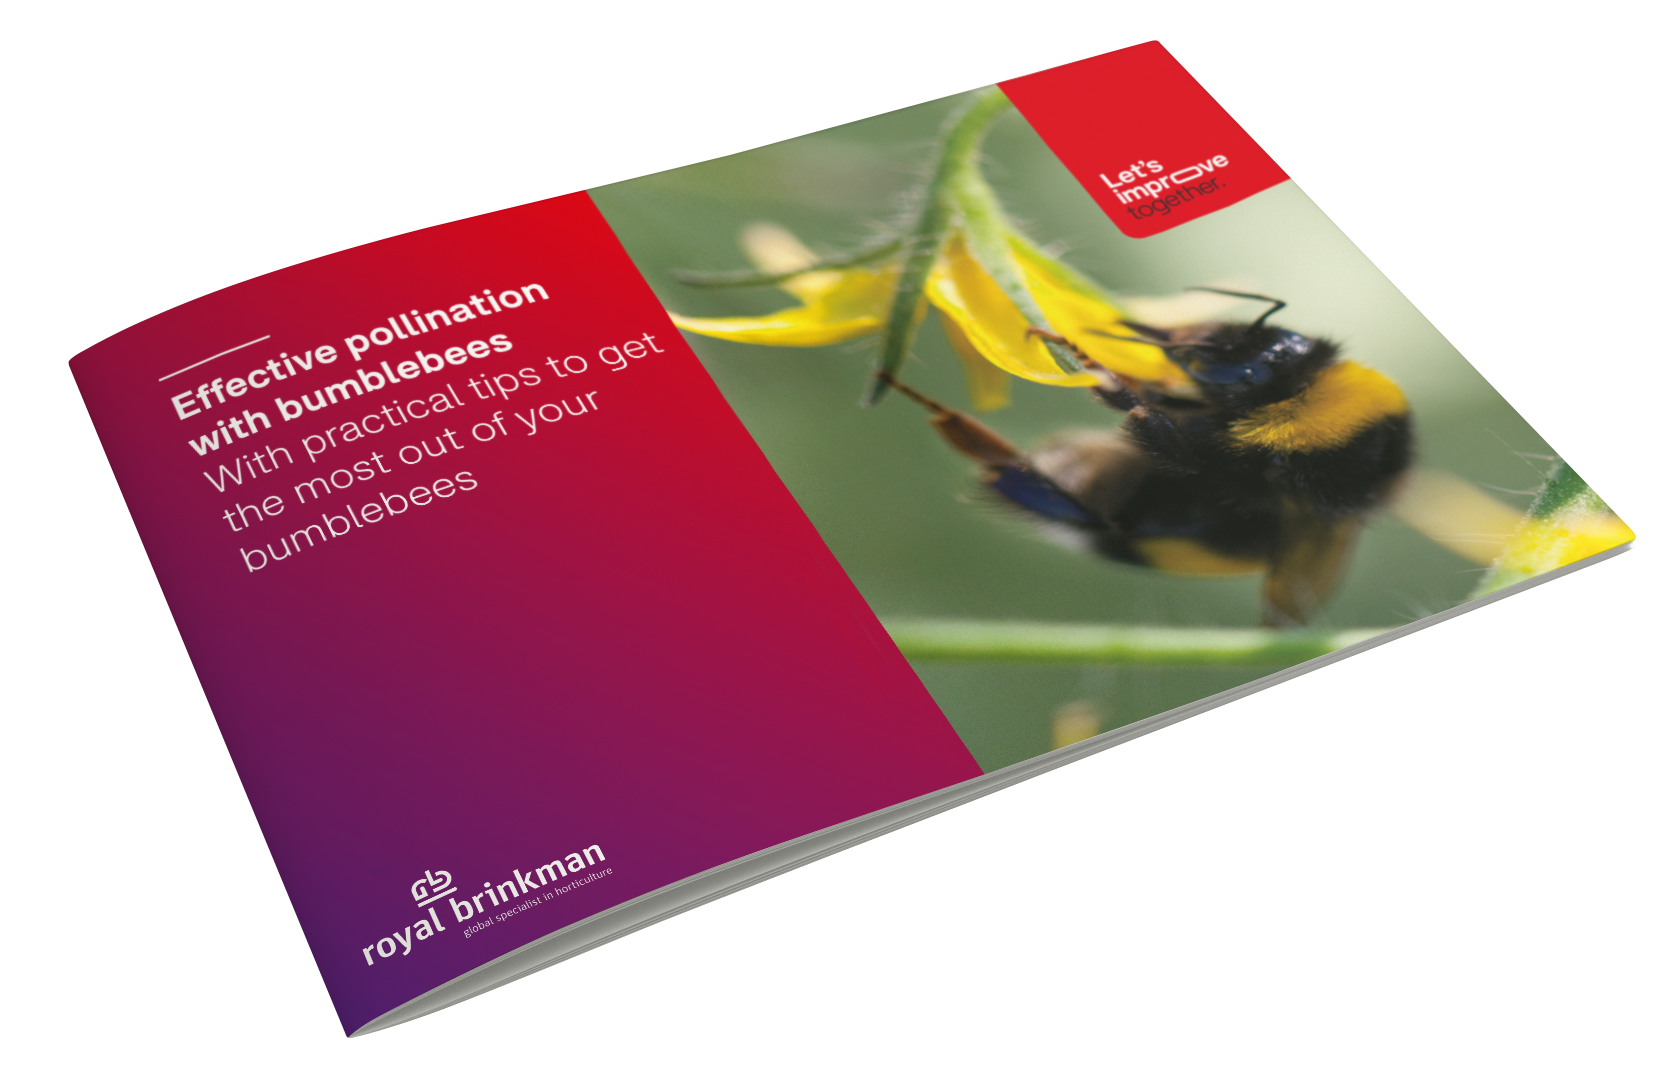 Whitepaper - Effective Pollination with Bumblebees